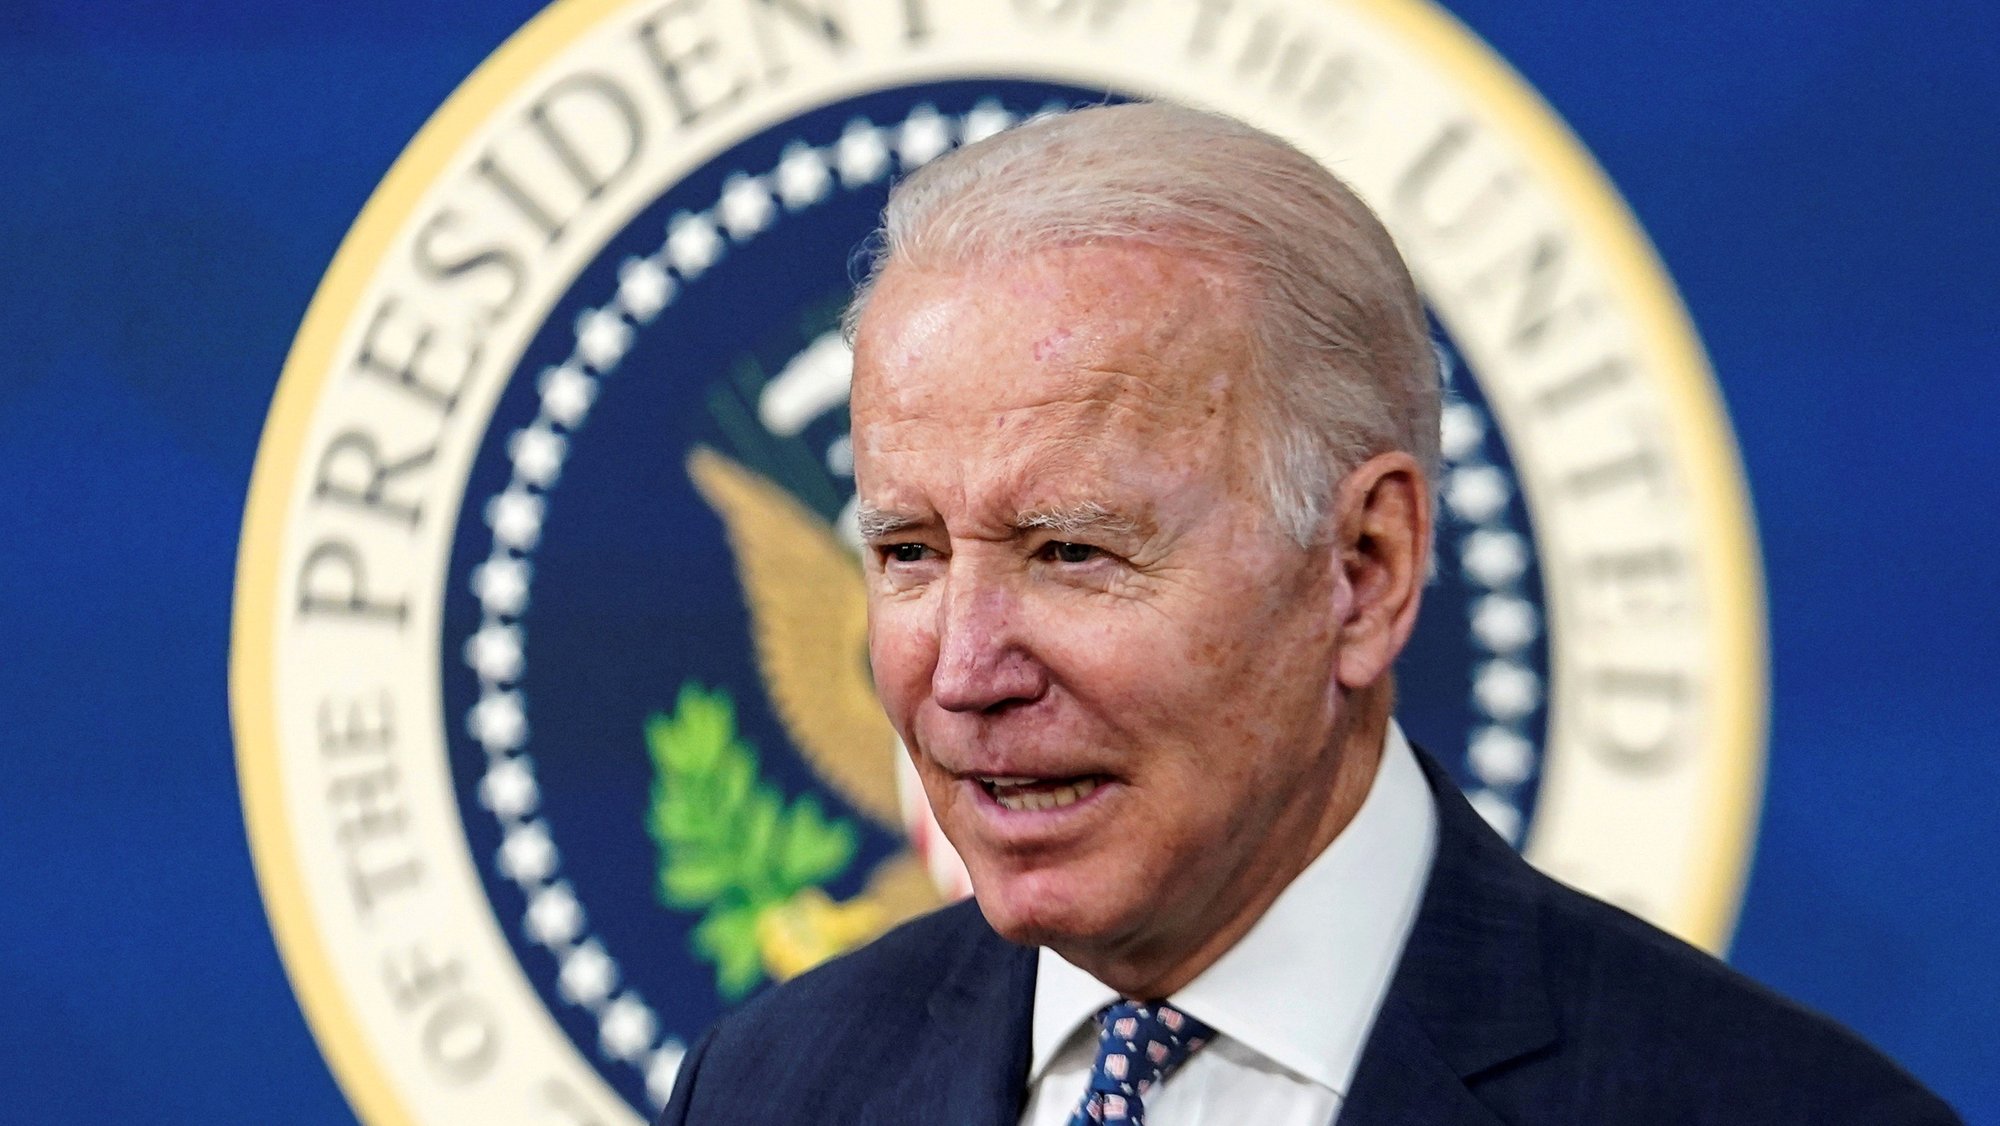 Biden pours 50 million barrels of oil to lower gasoline prices - gets high ratings